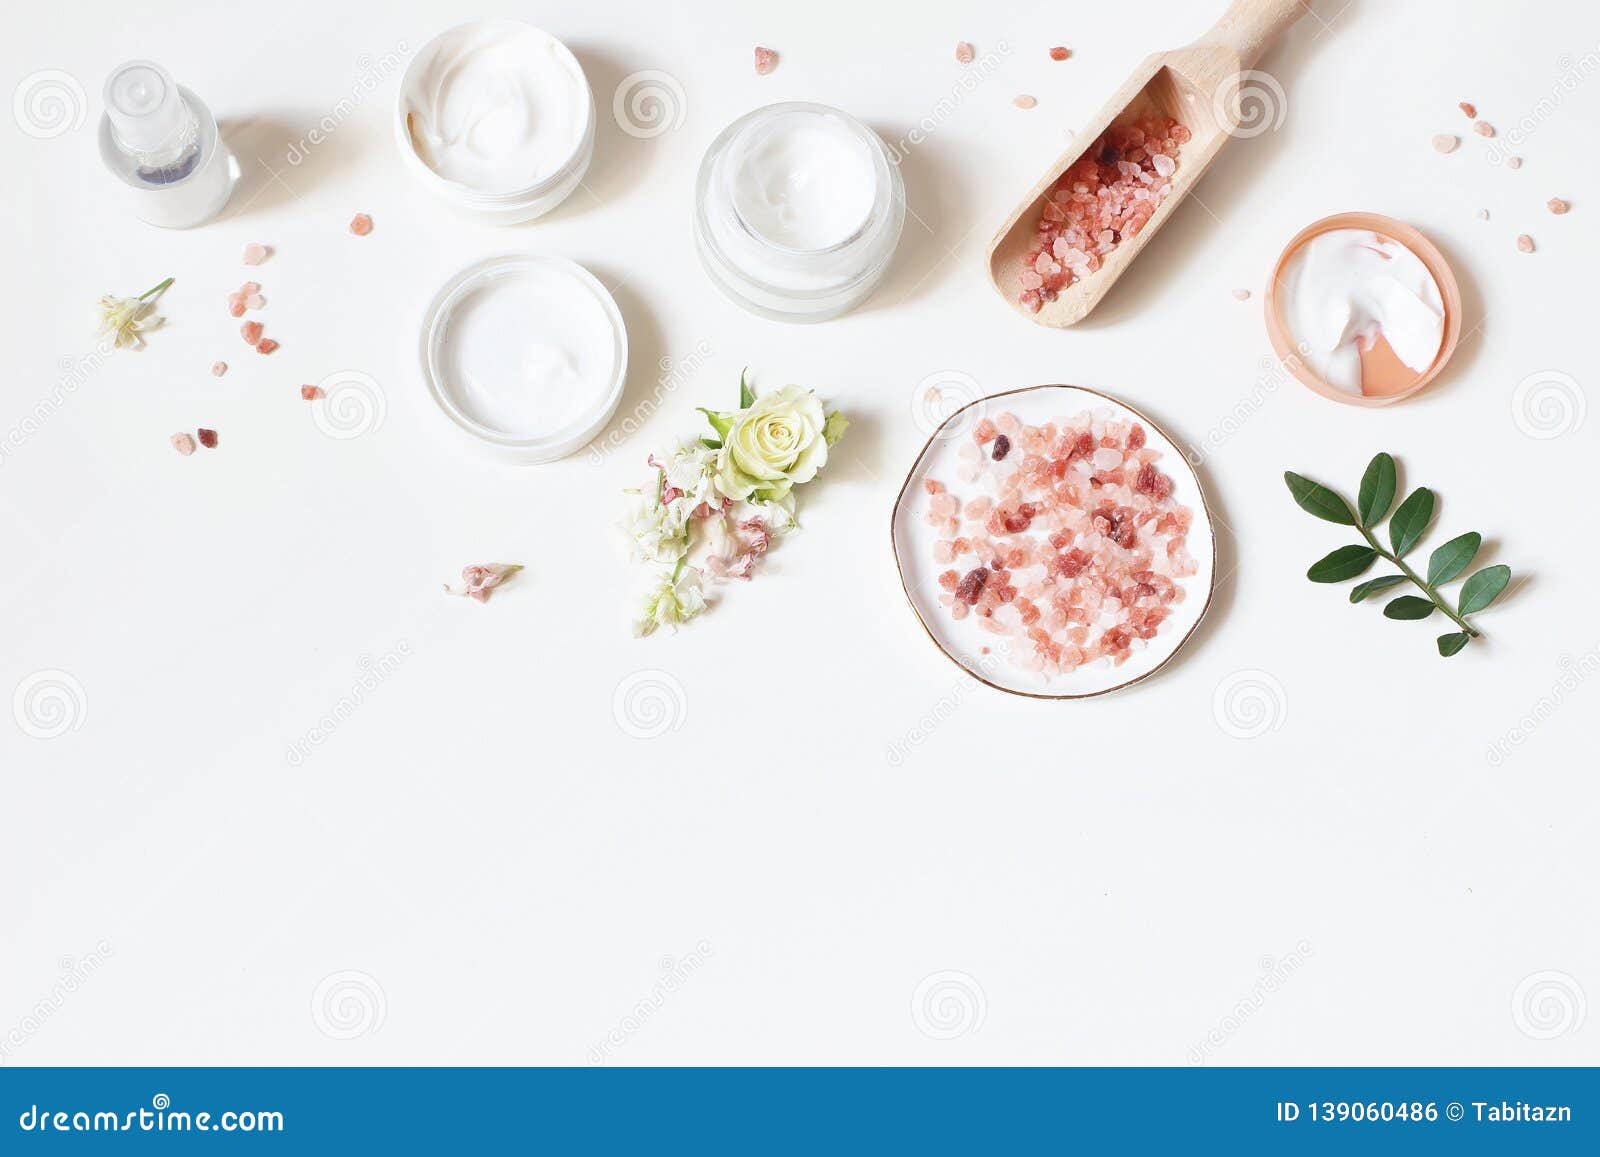 styled beauty frame, web banner. skin cream, tonicum bottle, dry flowers, leaves, rose and himalayan salt. white table